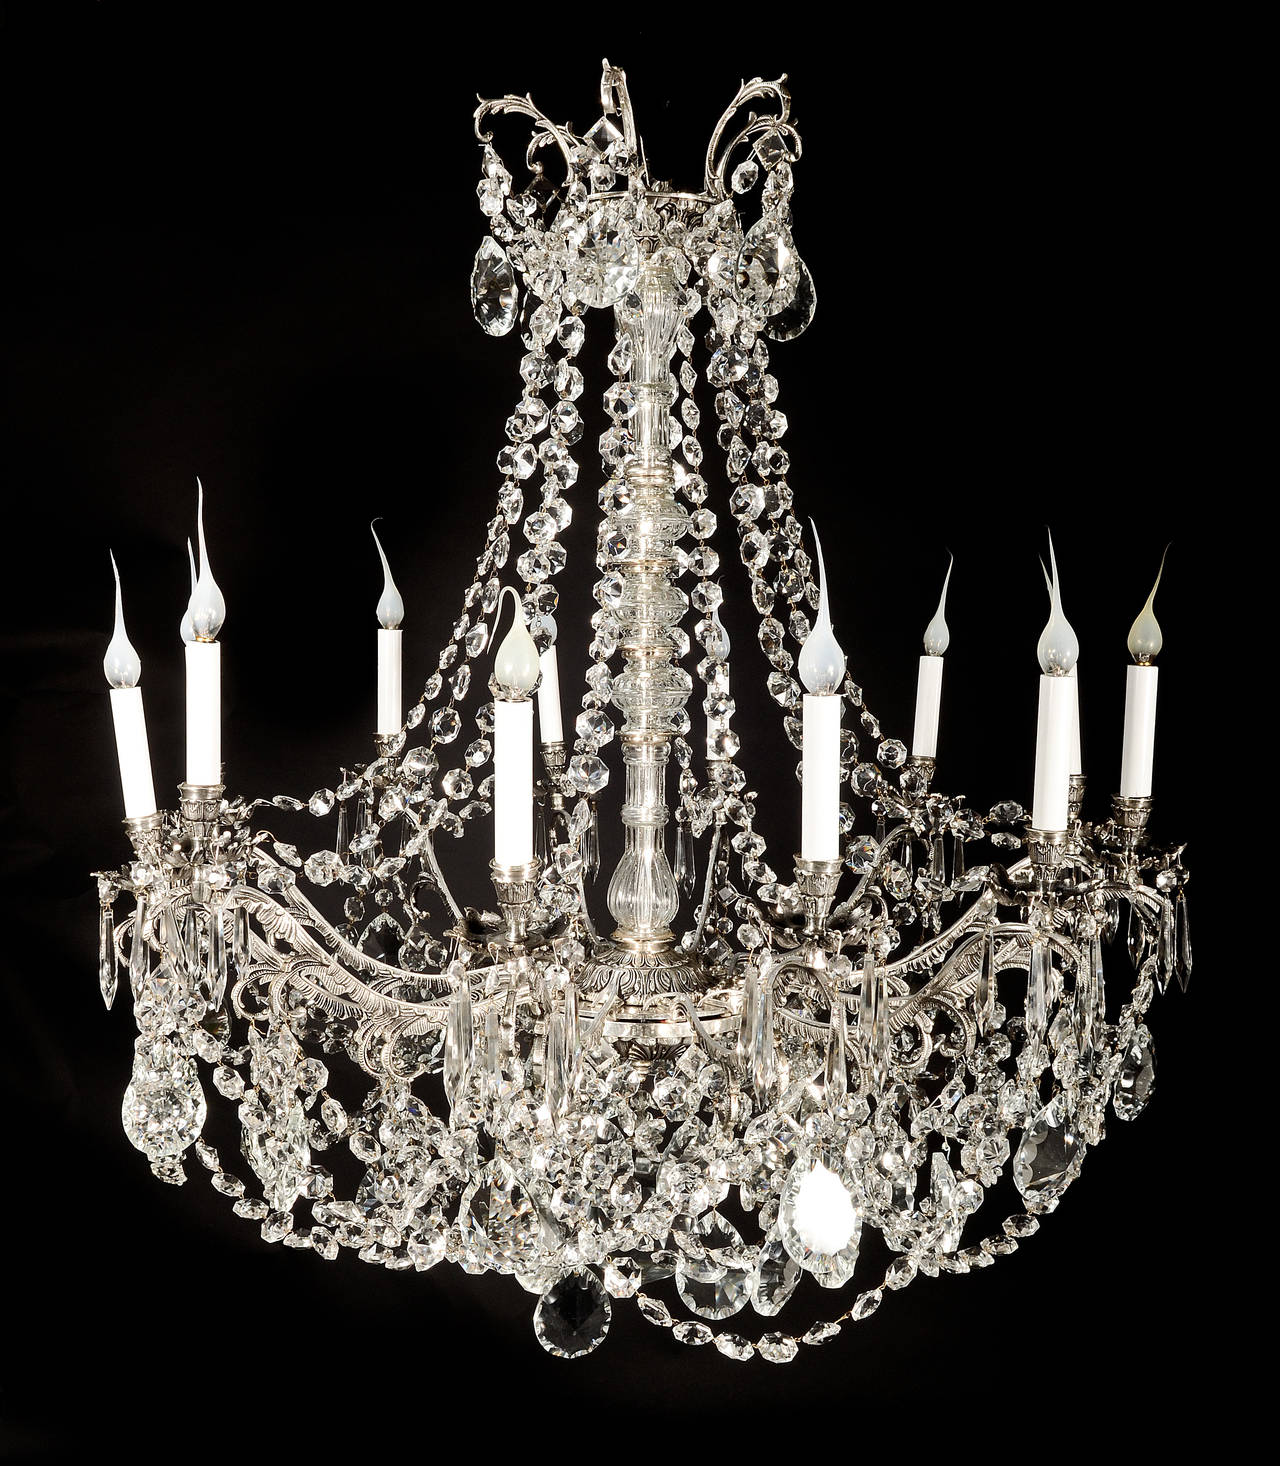 A large antique French Louis XVI style silvered bronze and cut crystal multi light chandelier embellished with cut crystal chains and prisms.